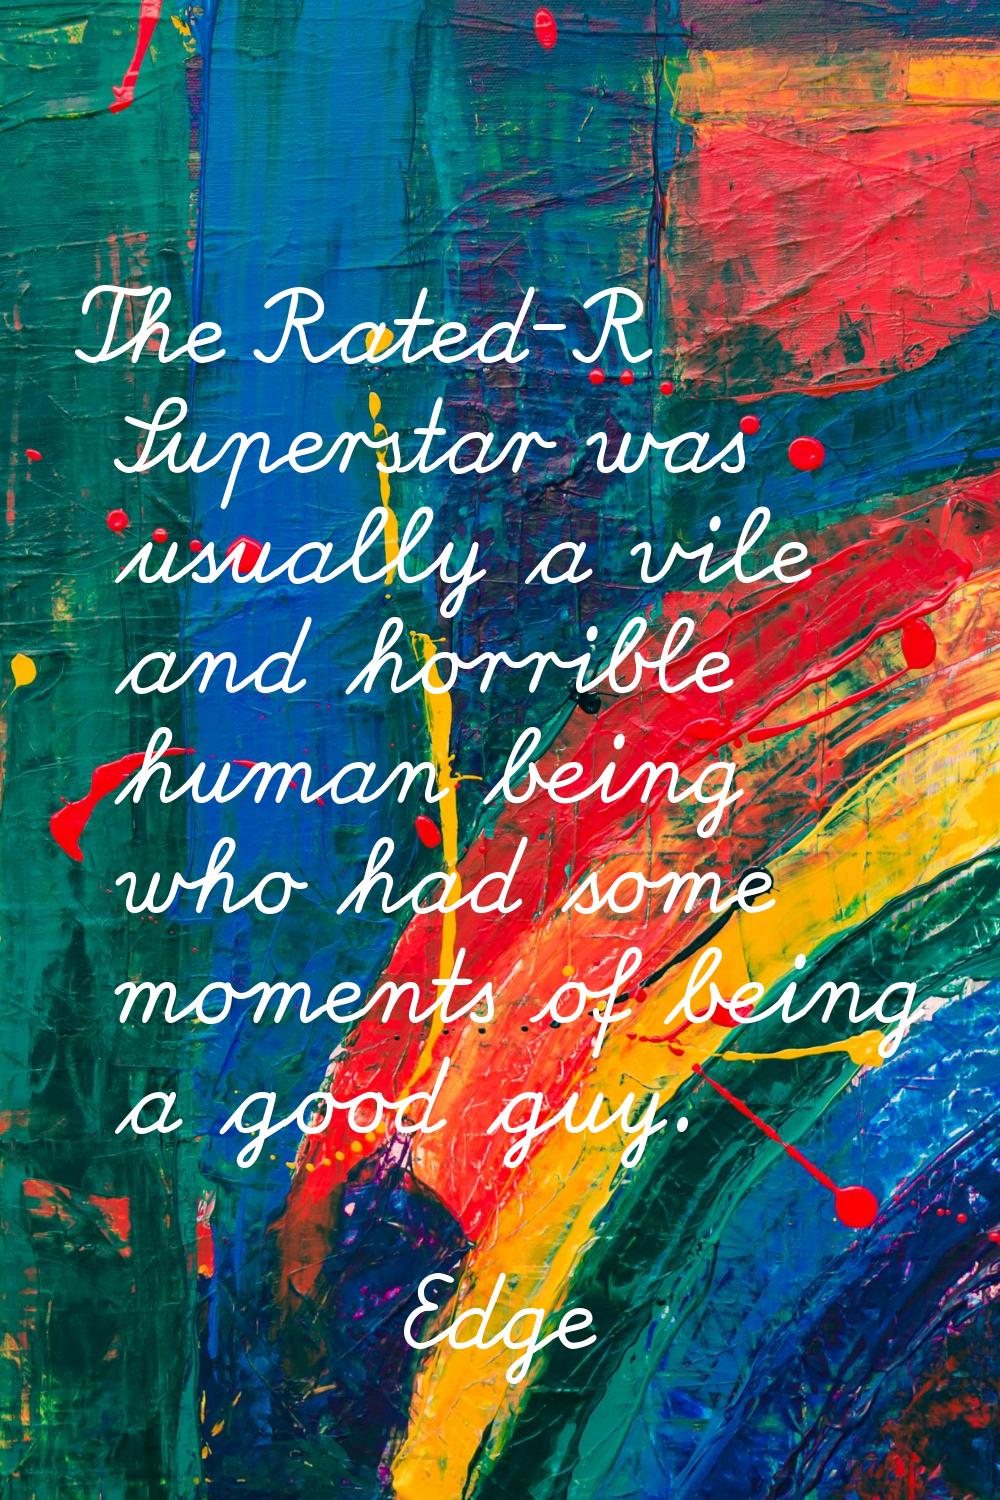 The Rated-R Superstar was usually a vile and horrible human being who had some moments of being a g